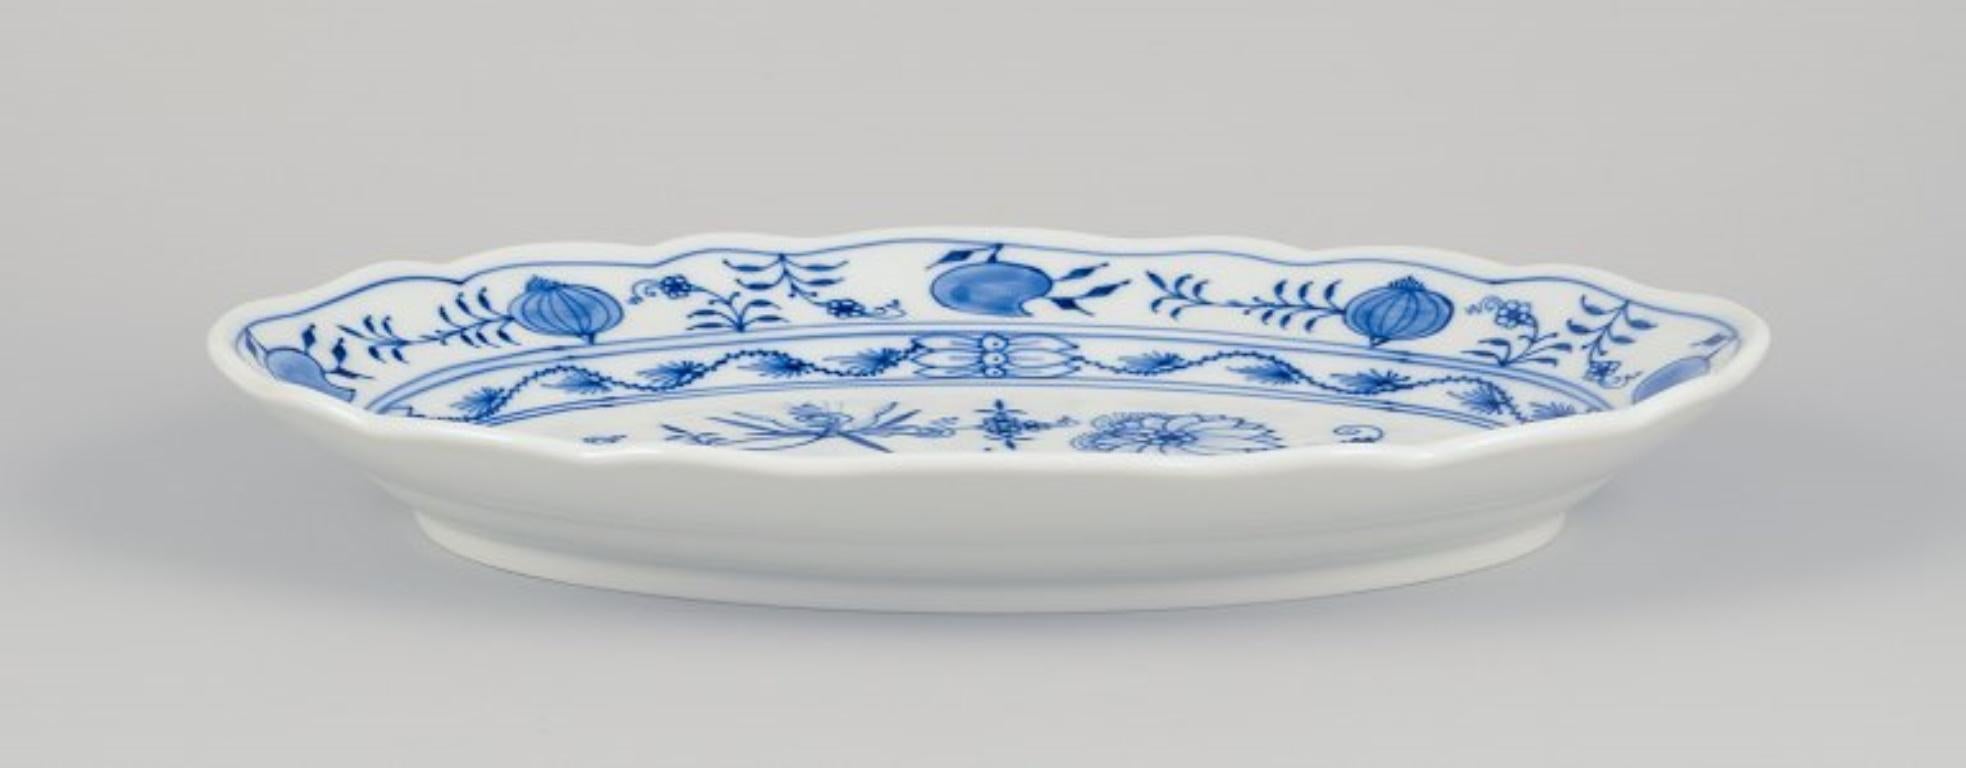 Meissen, Germany. Large oval Blue Onion pattern serving platter. Hand-painted.
Mid-20th century.
Marked.
First factory quality.
In perfect condition.
Dimensions: Length 35.2 cm x Width 26.0 cm x Height 4.6 cm.